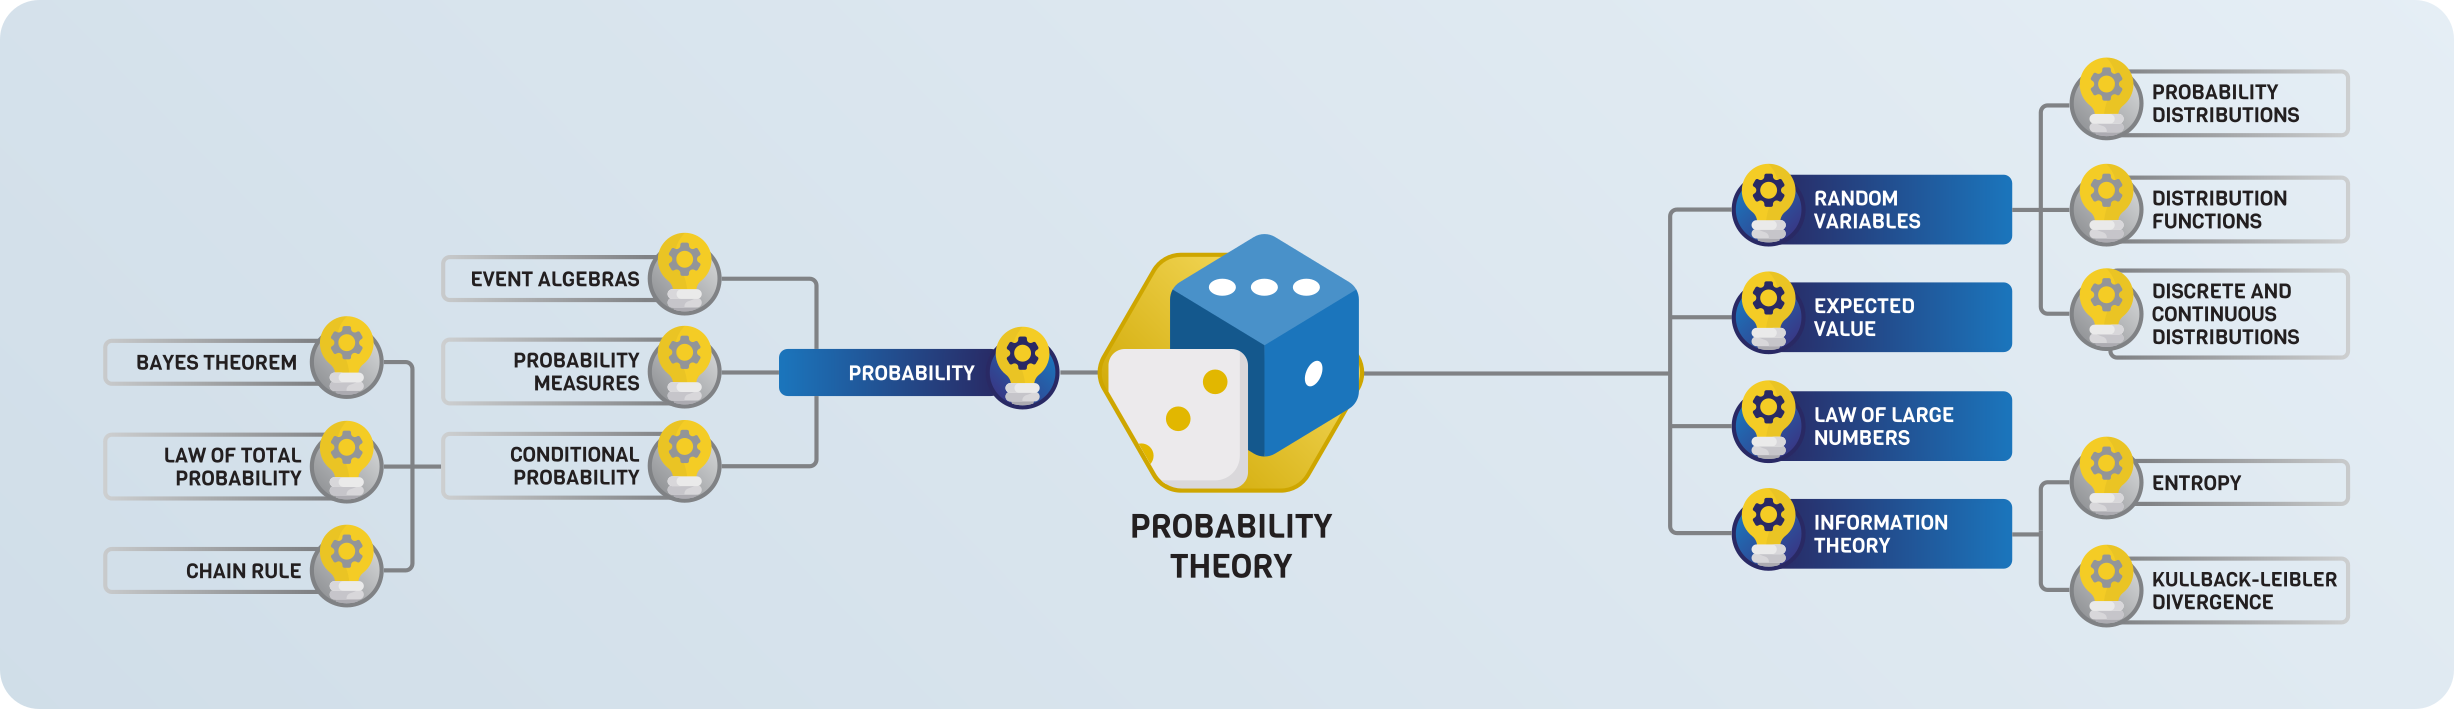 _images/05-probability-theory.png